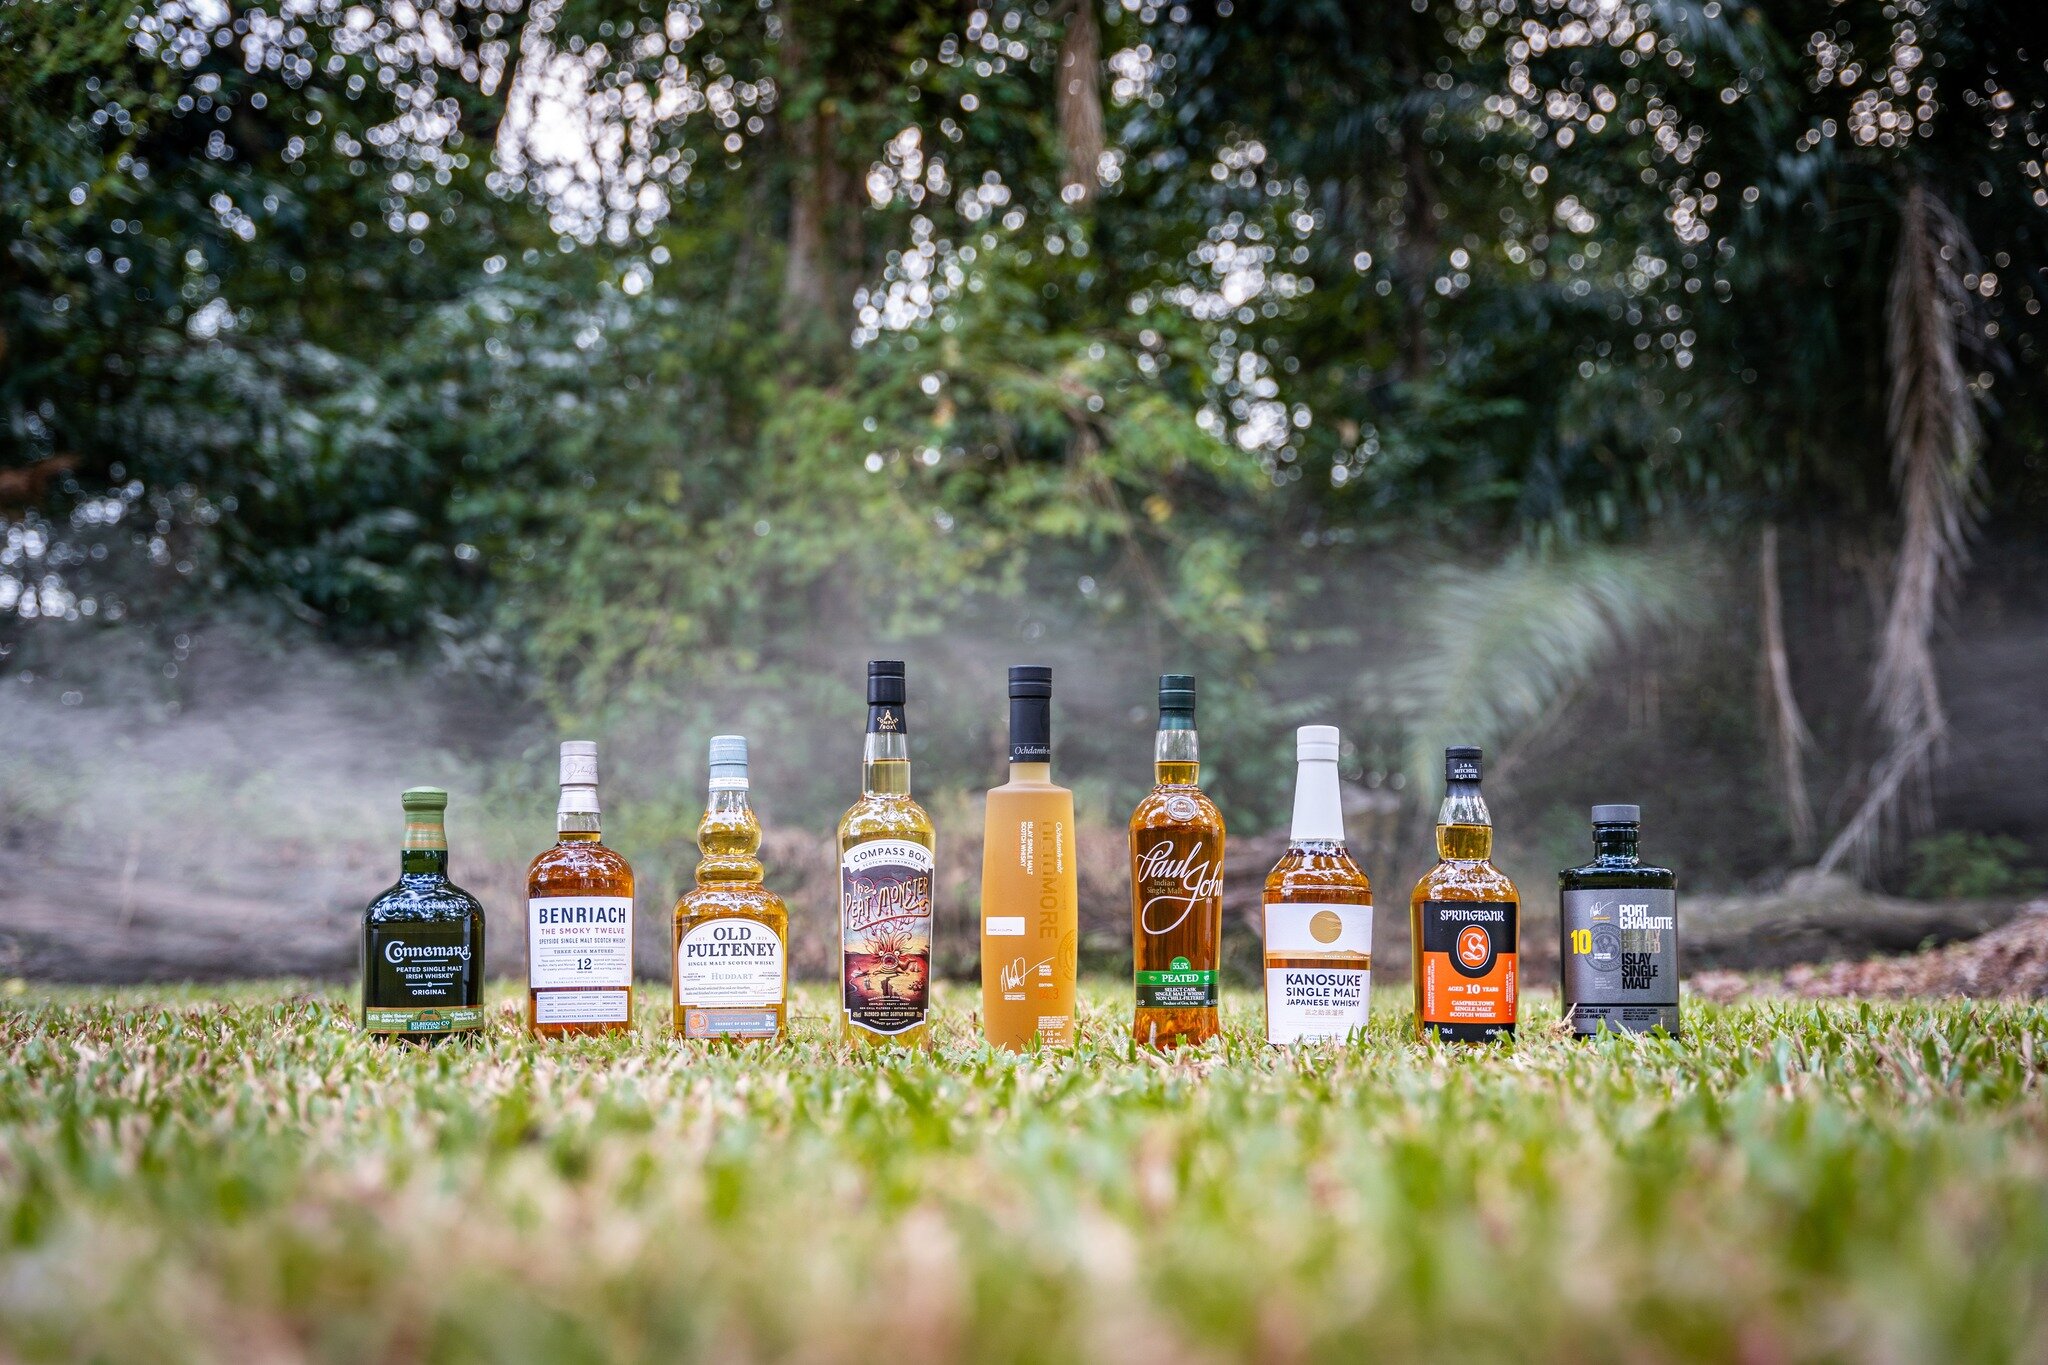 Unearthing the fun of peat with our latest edition - For Peat's Sake! 🌿🔥

Peated whiskies? They're the rule-breakers, the edgy cousins in the whisky family. However, there is always more to them than just smoke! Where the peat is from, how much it 